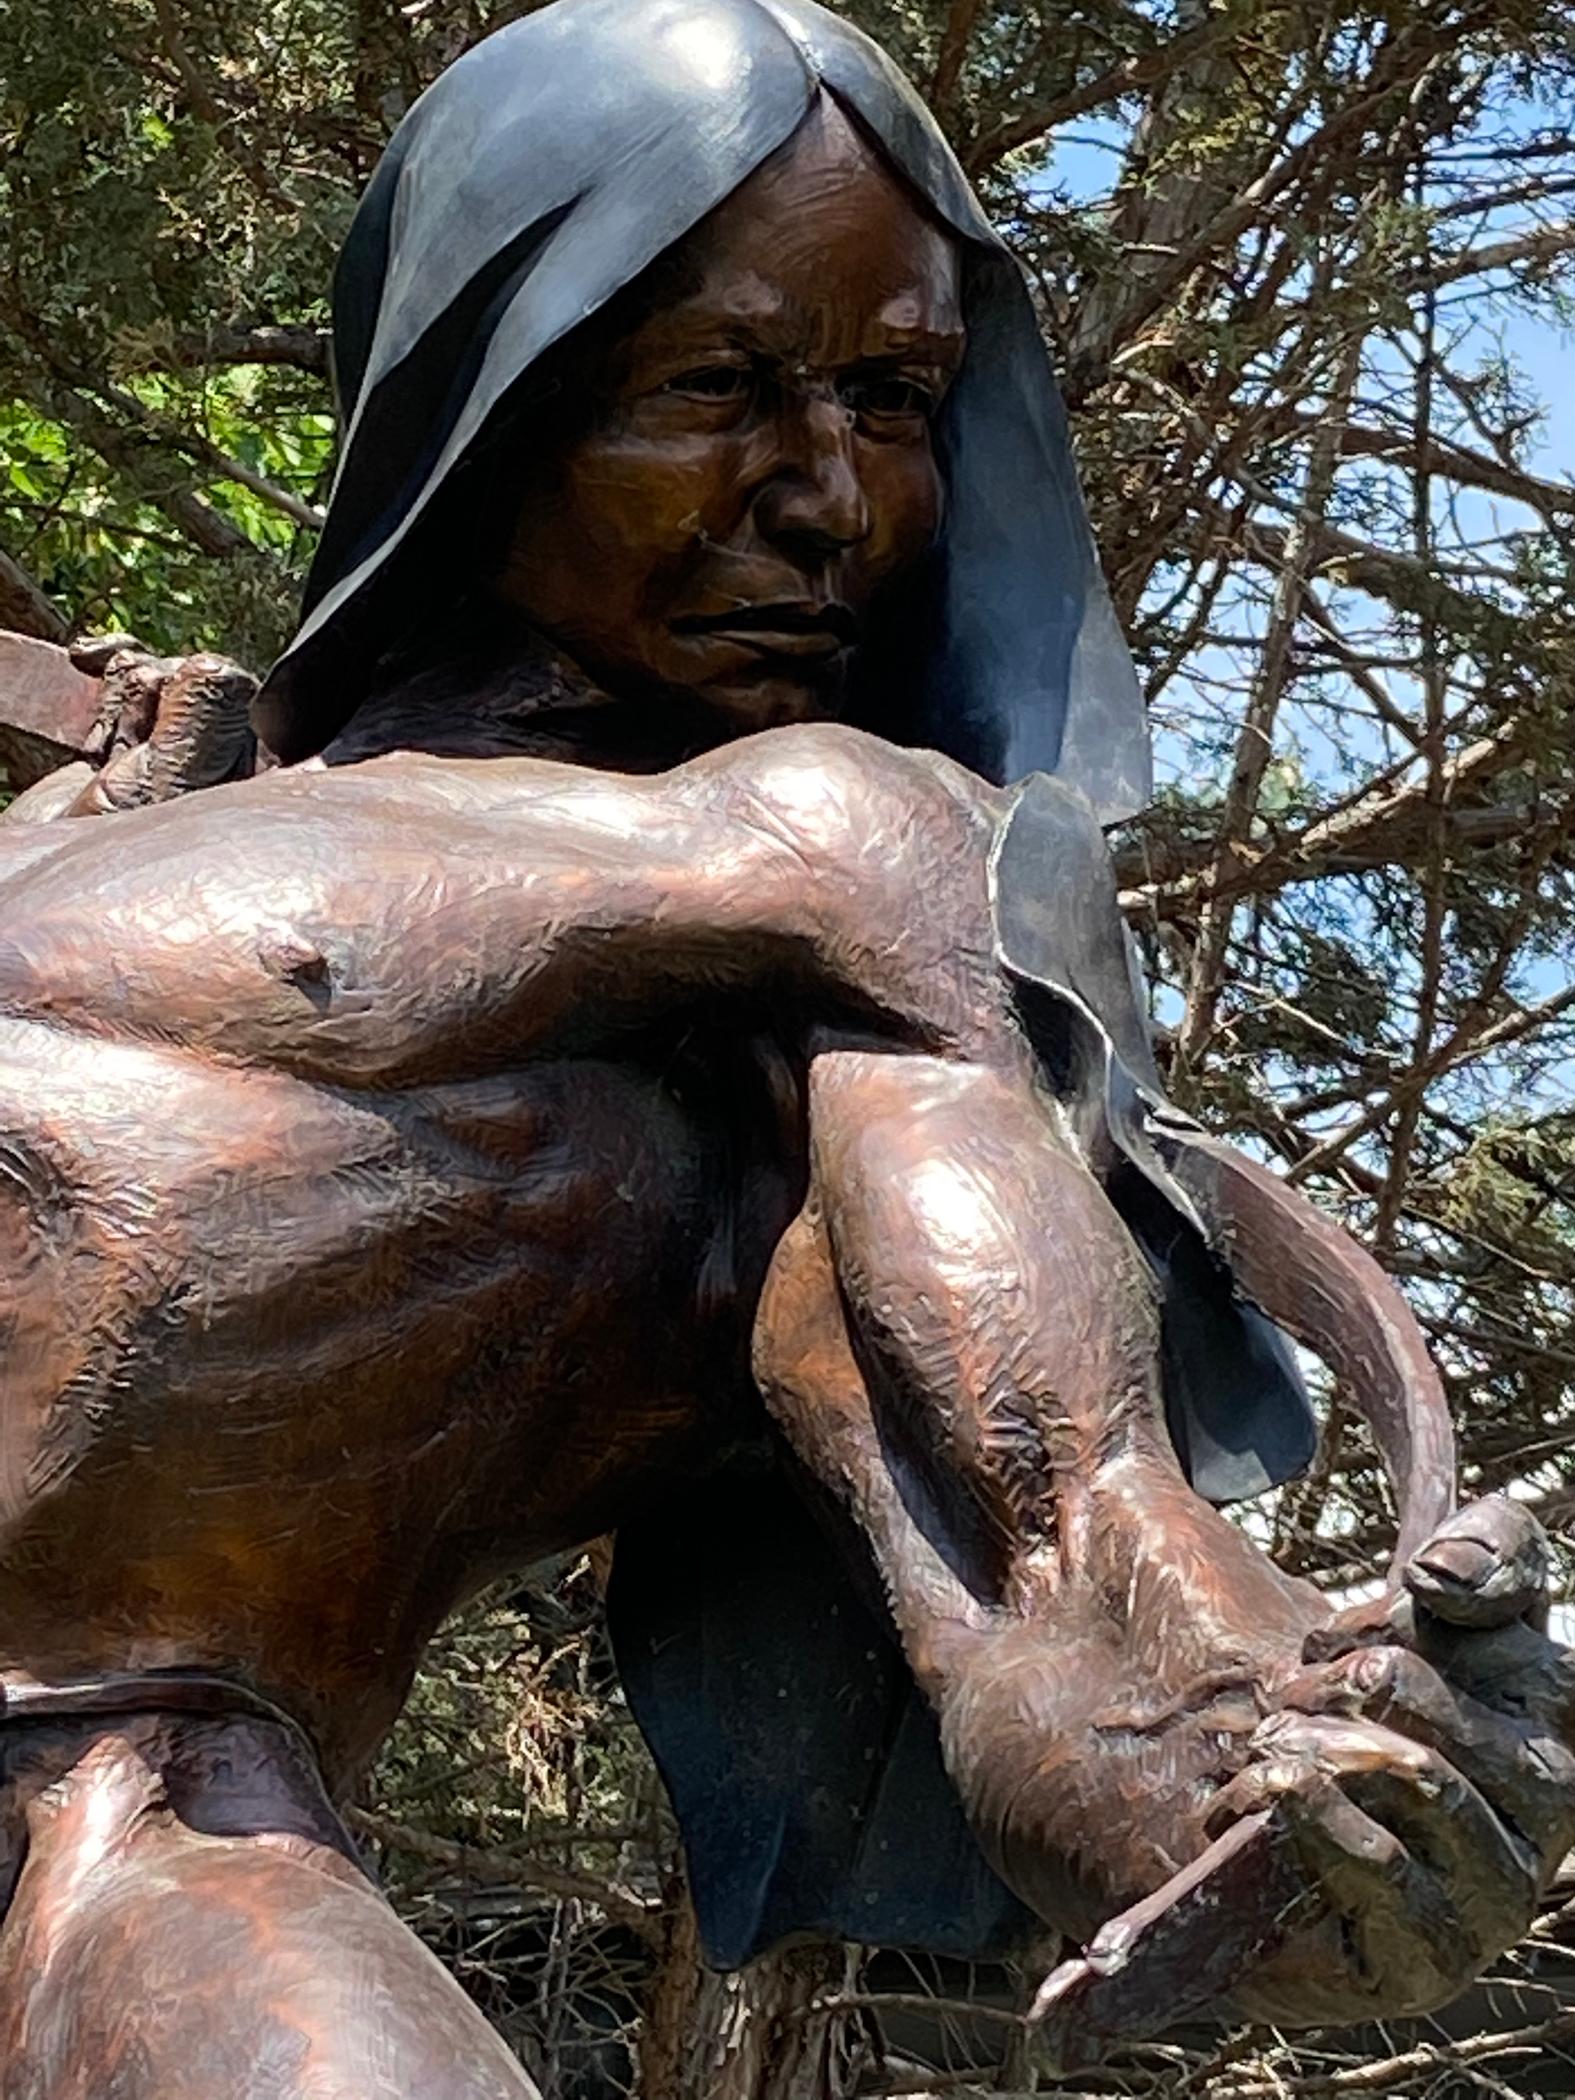 Strength of the Maker by Denny Haskew
Native American Figurative Bronze
50x42x45